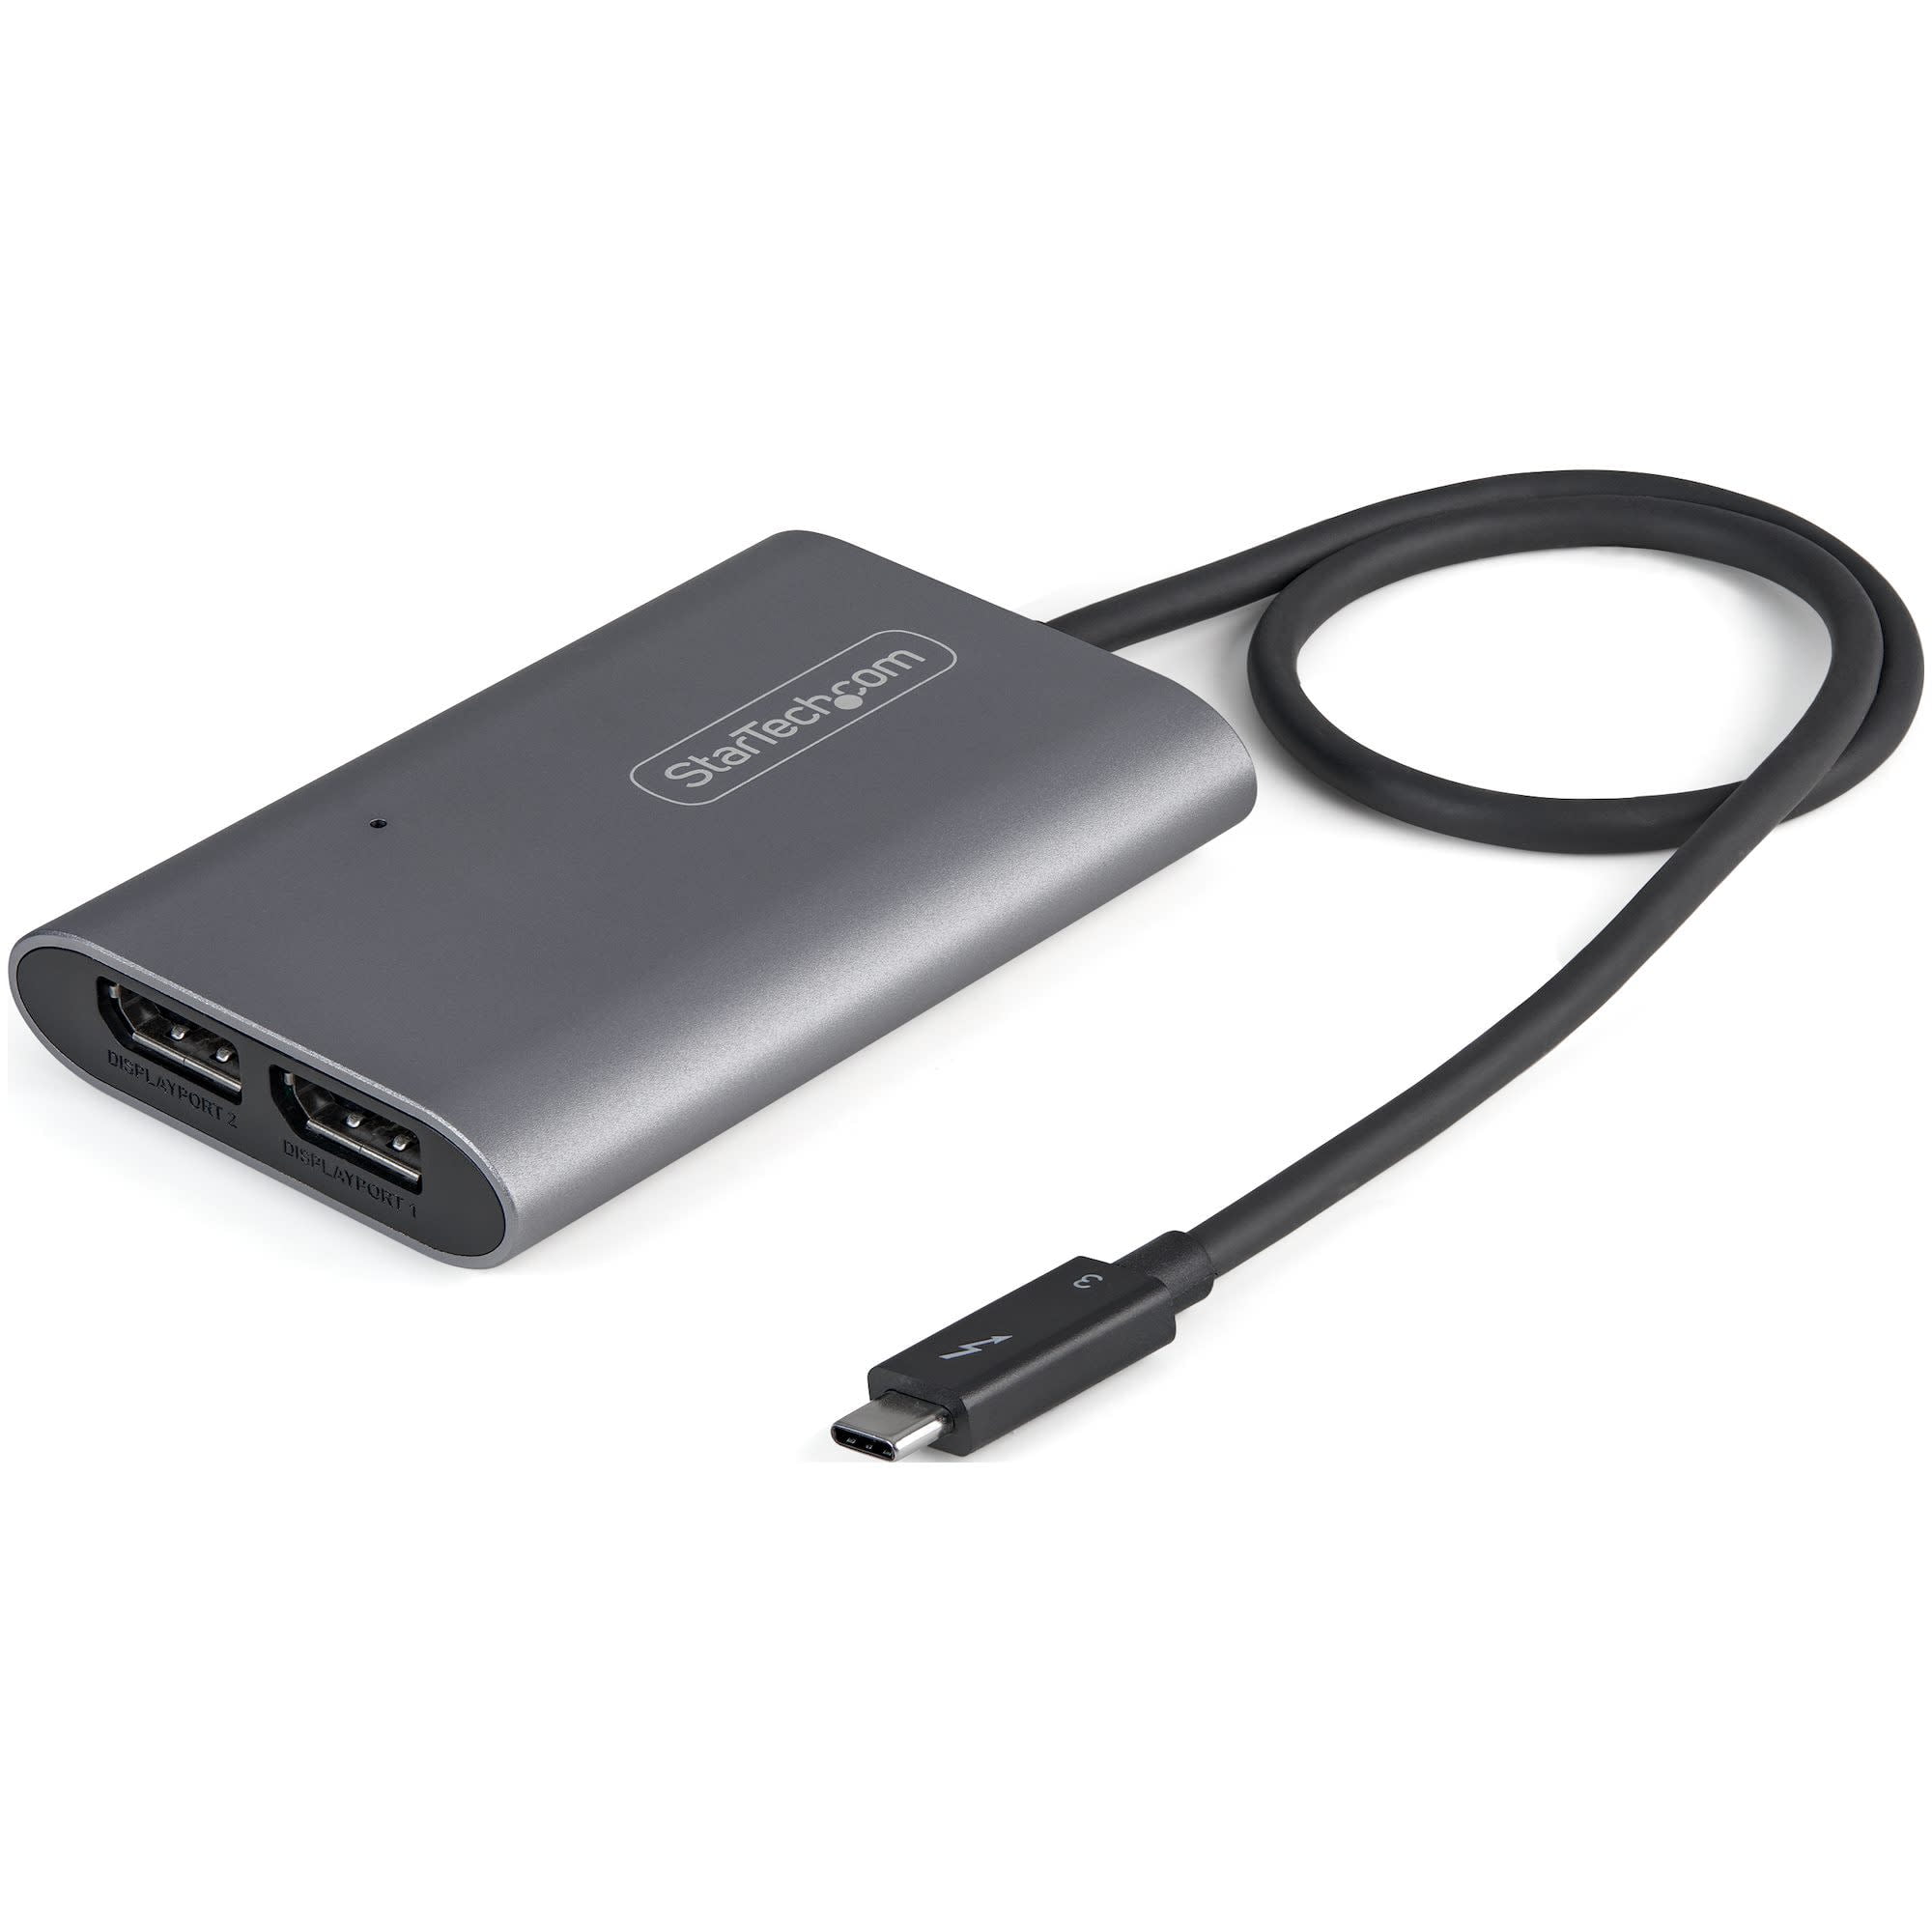  Plugable USB 3.0 to DVI/VGA/HDMI Video Graphics Adapter for  Multiple Monitors up to 2048x1152 Supports Windows 11, 10, 8.1, 7, XP, and  Mac 10.14+ : Electronics